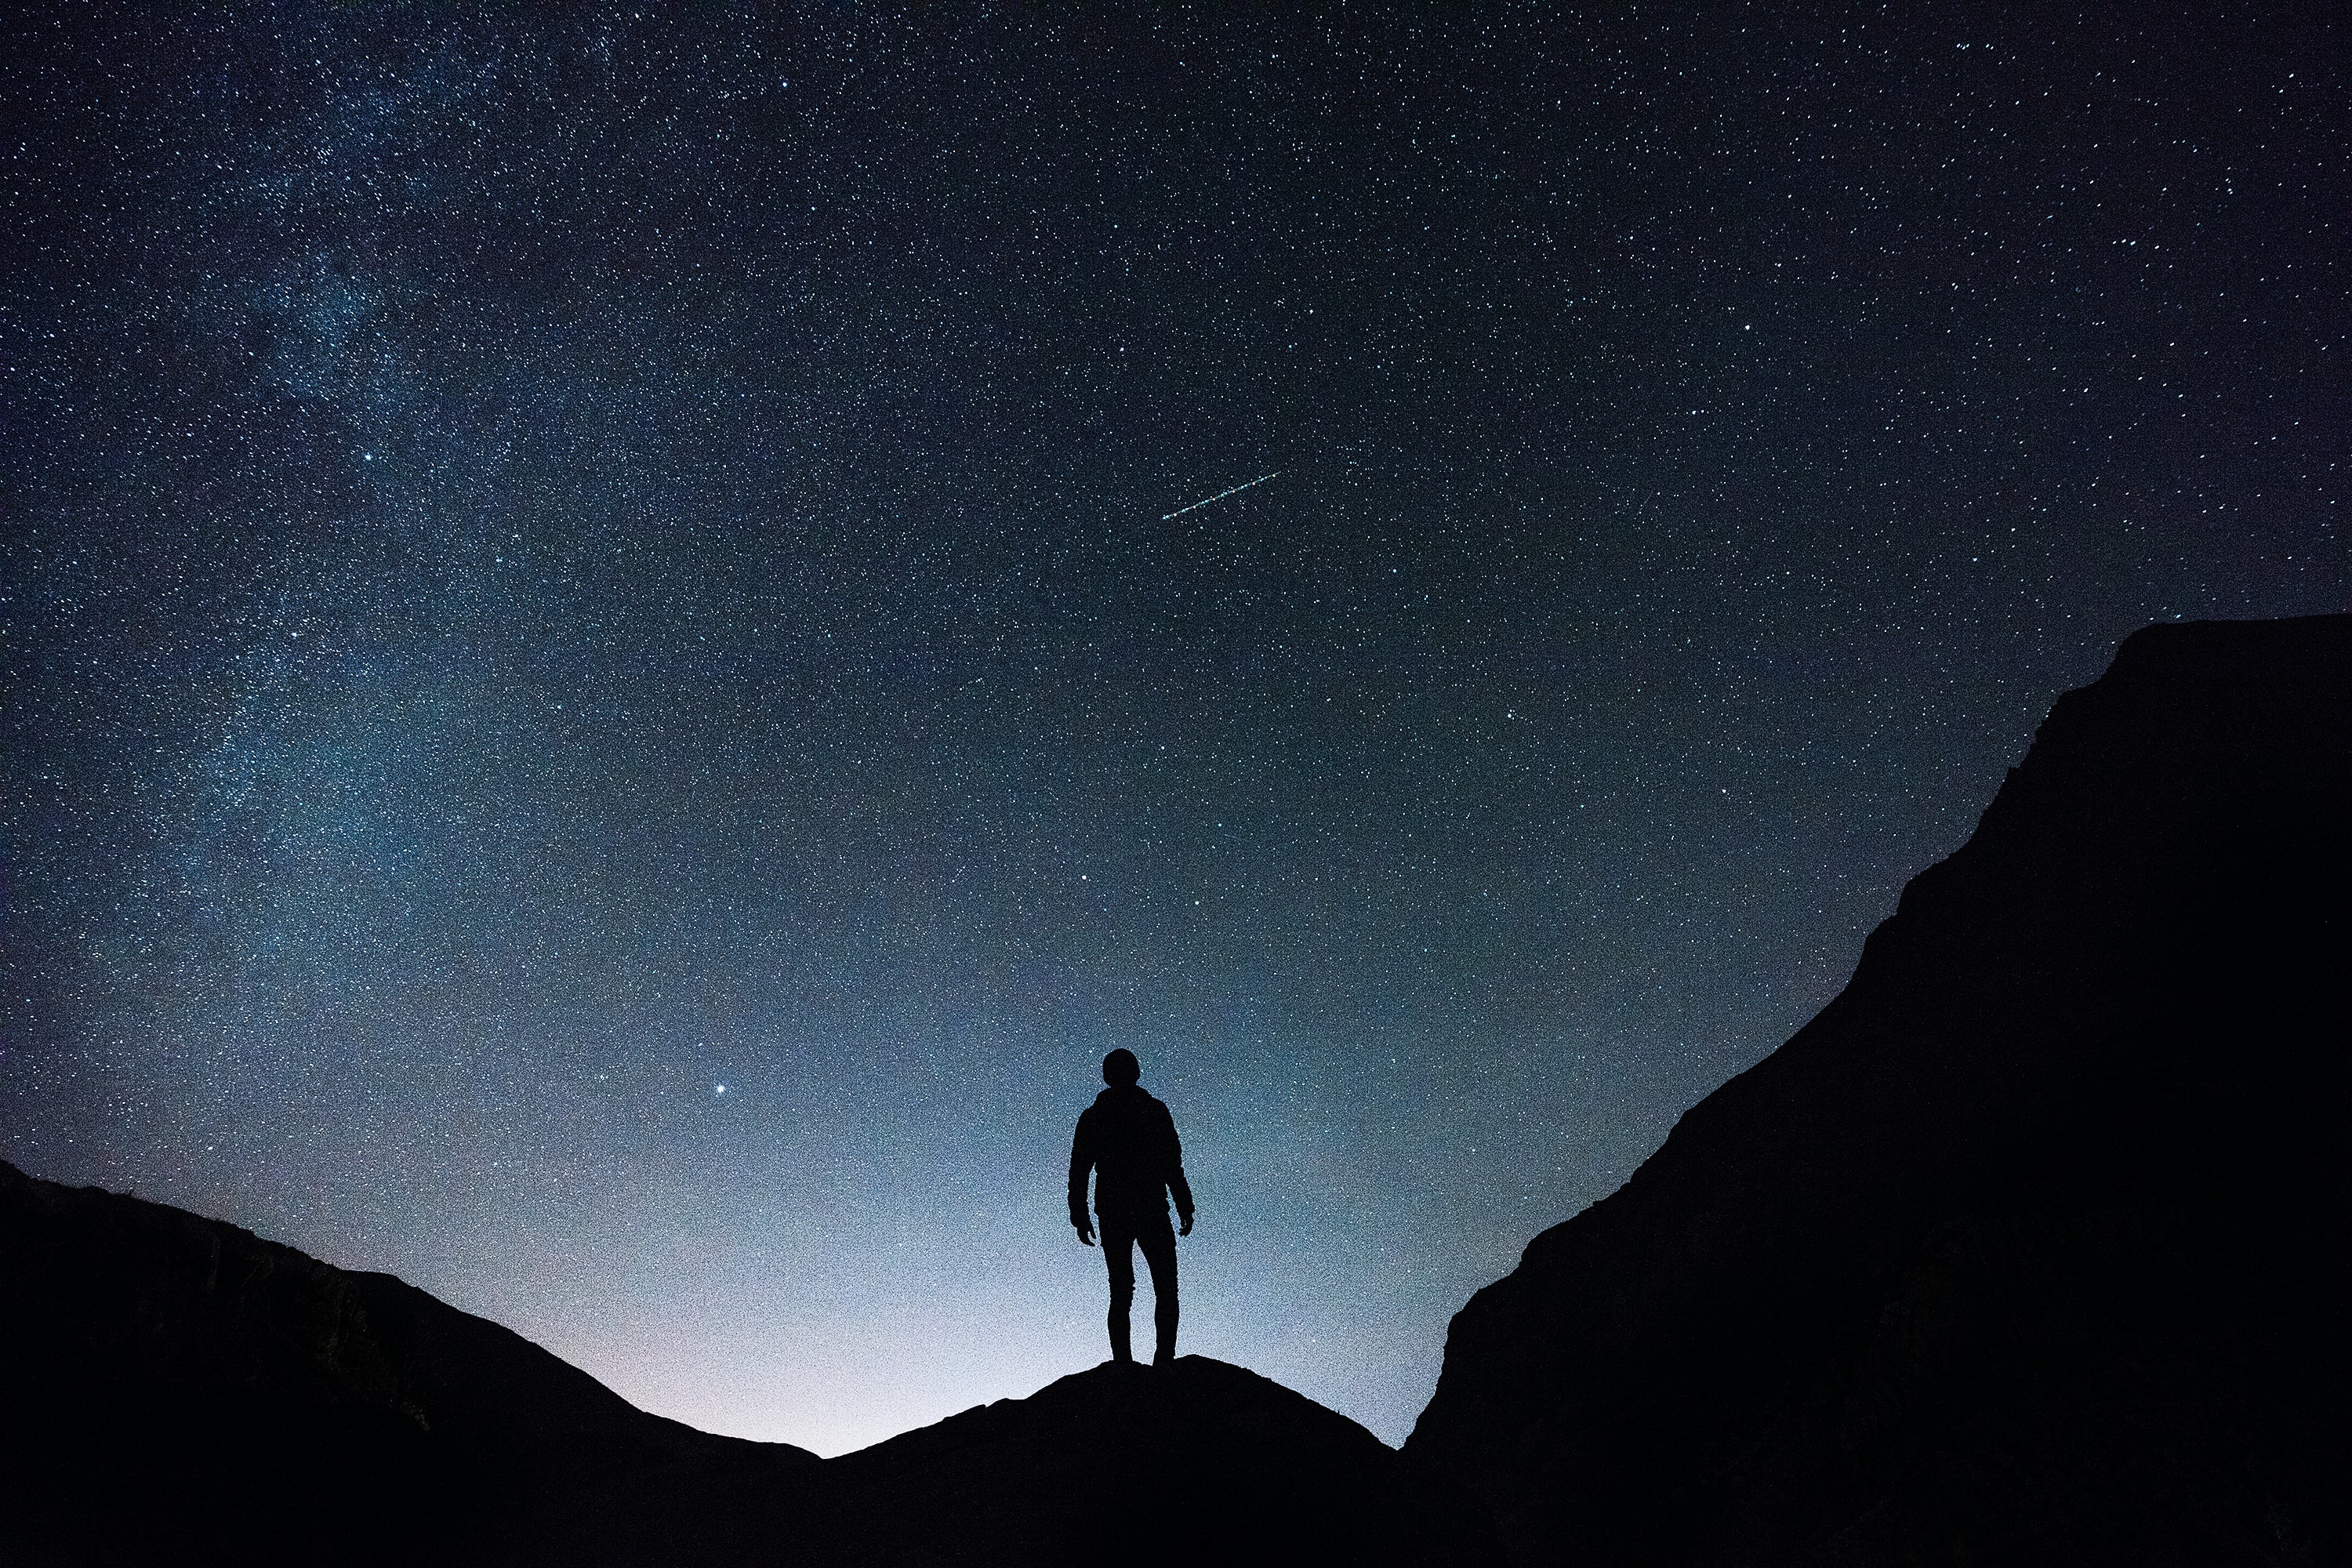 Silhouette of a person standing on a mountain under a starry night sky